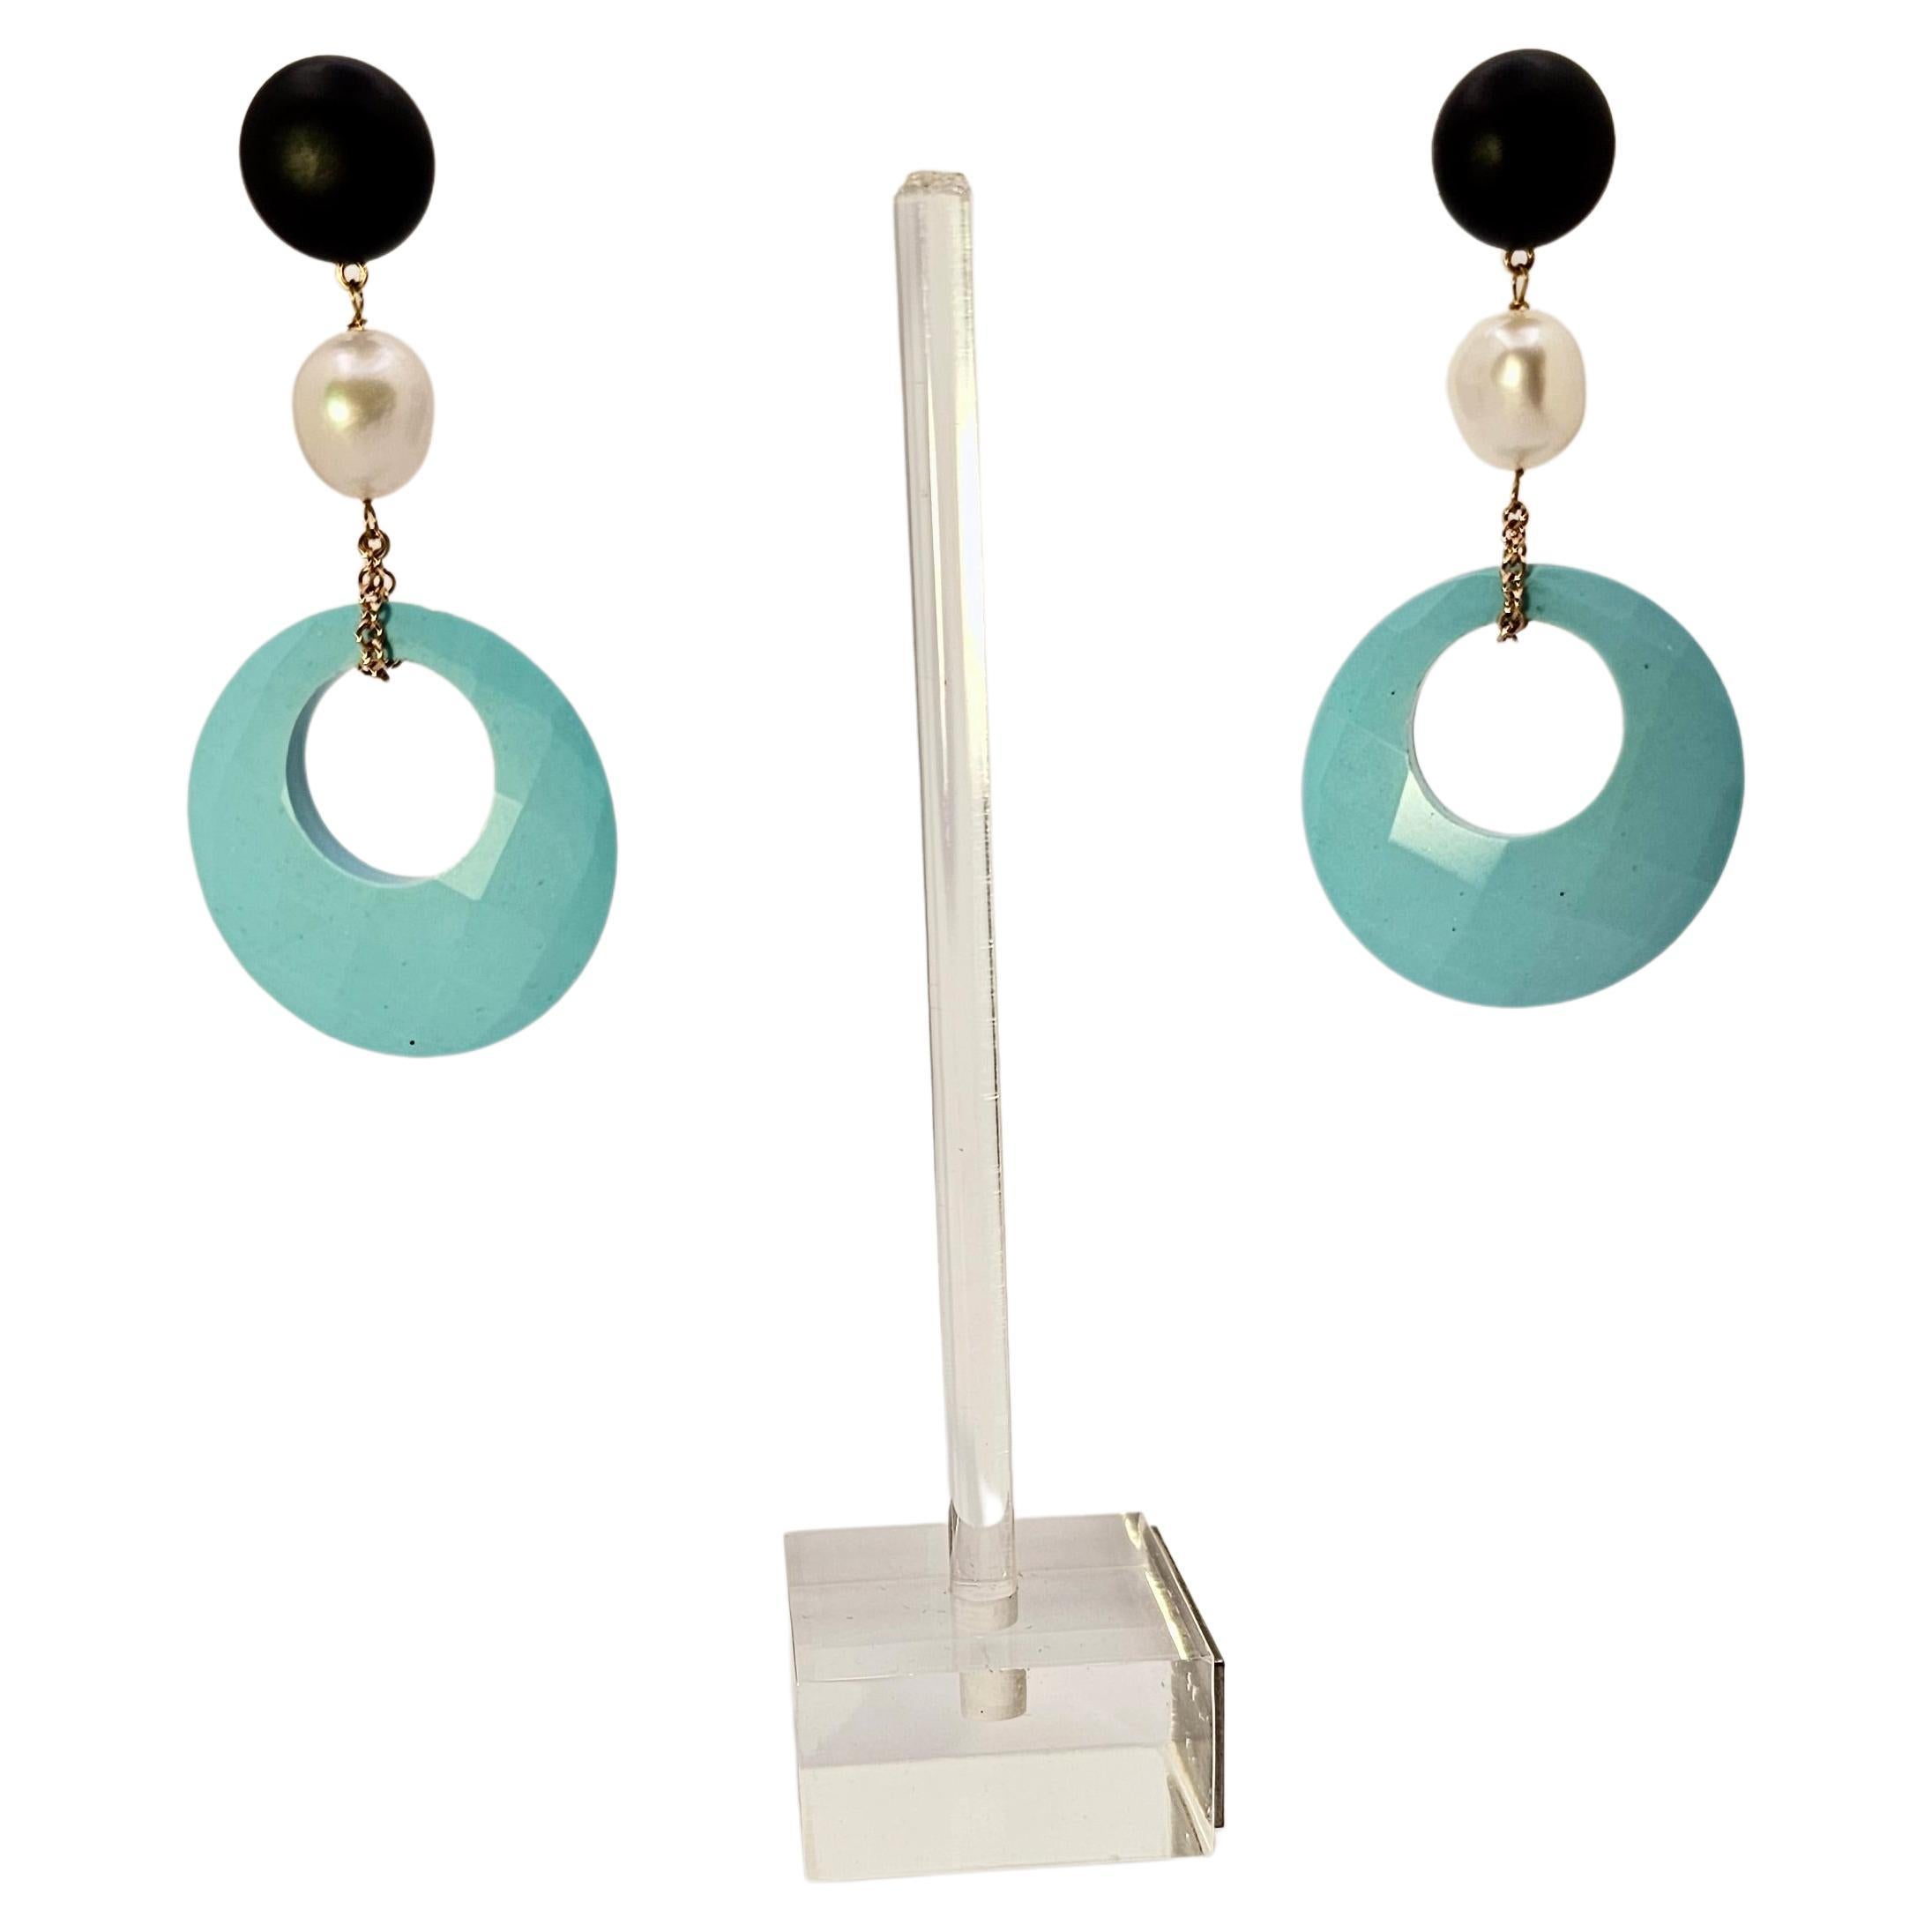 Chandelier Earrings in Rose Gold, Turquoise Paste, Jade and Pearls